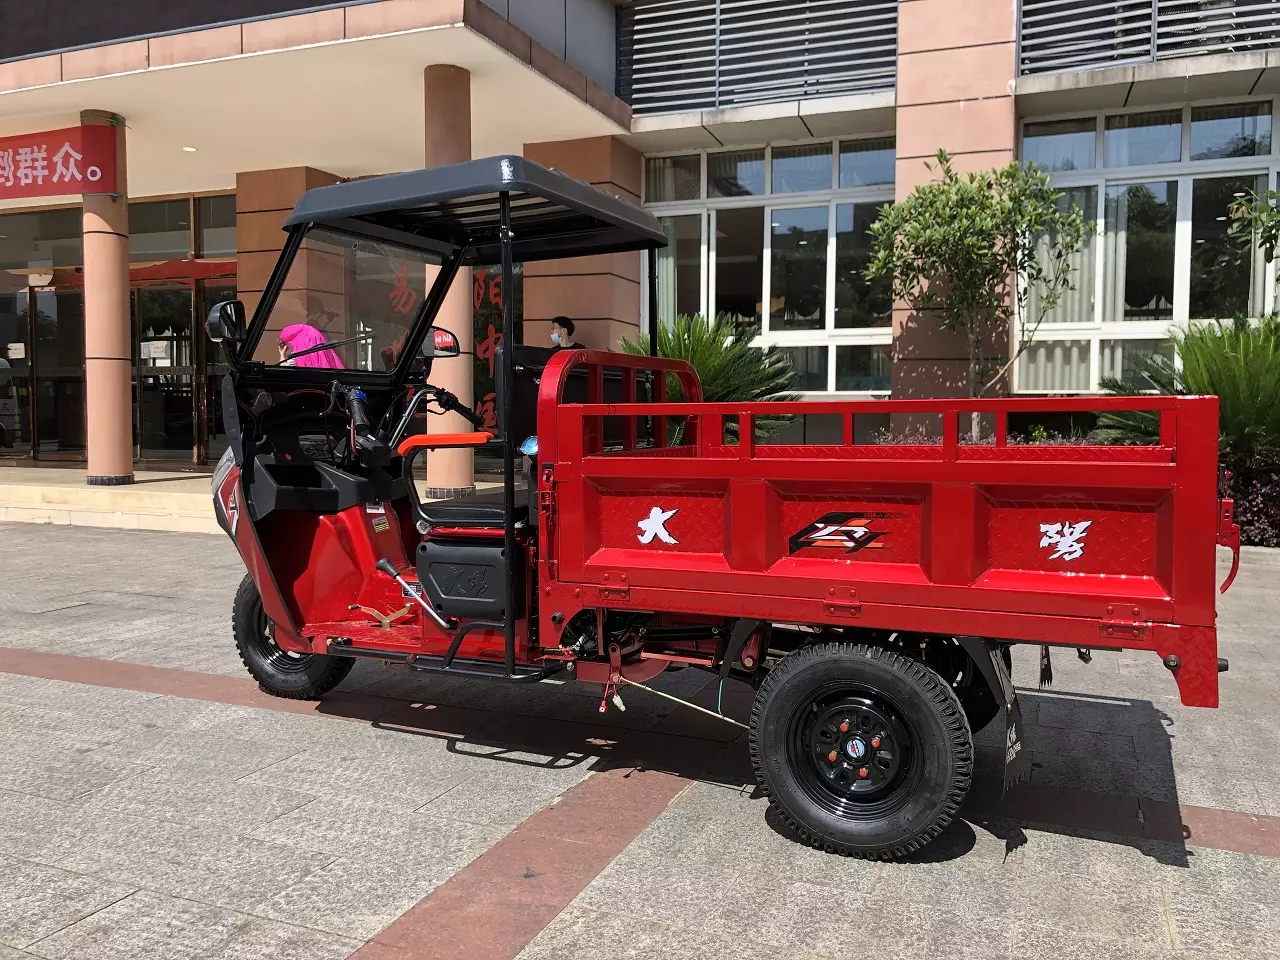 High cost performance well sell truck tricycle motors corporation 200 cc gh for selling motorized tricycles moteur gazoil